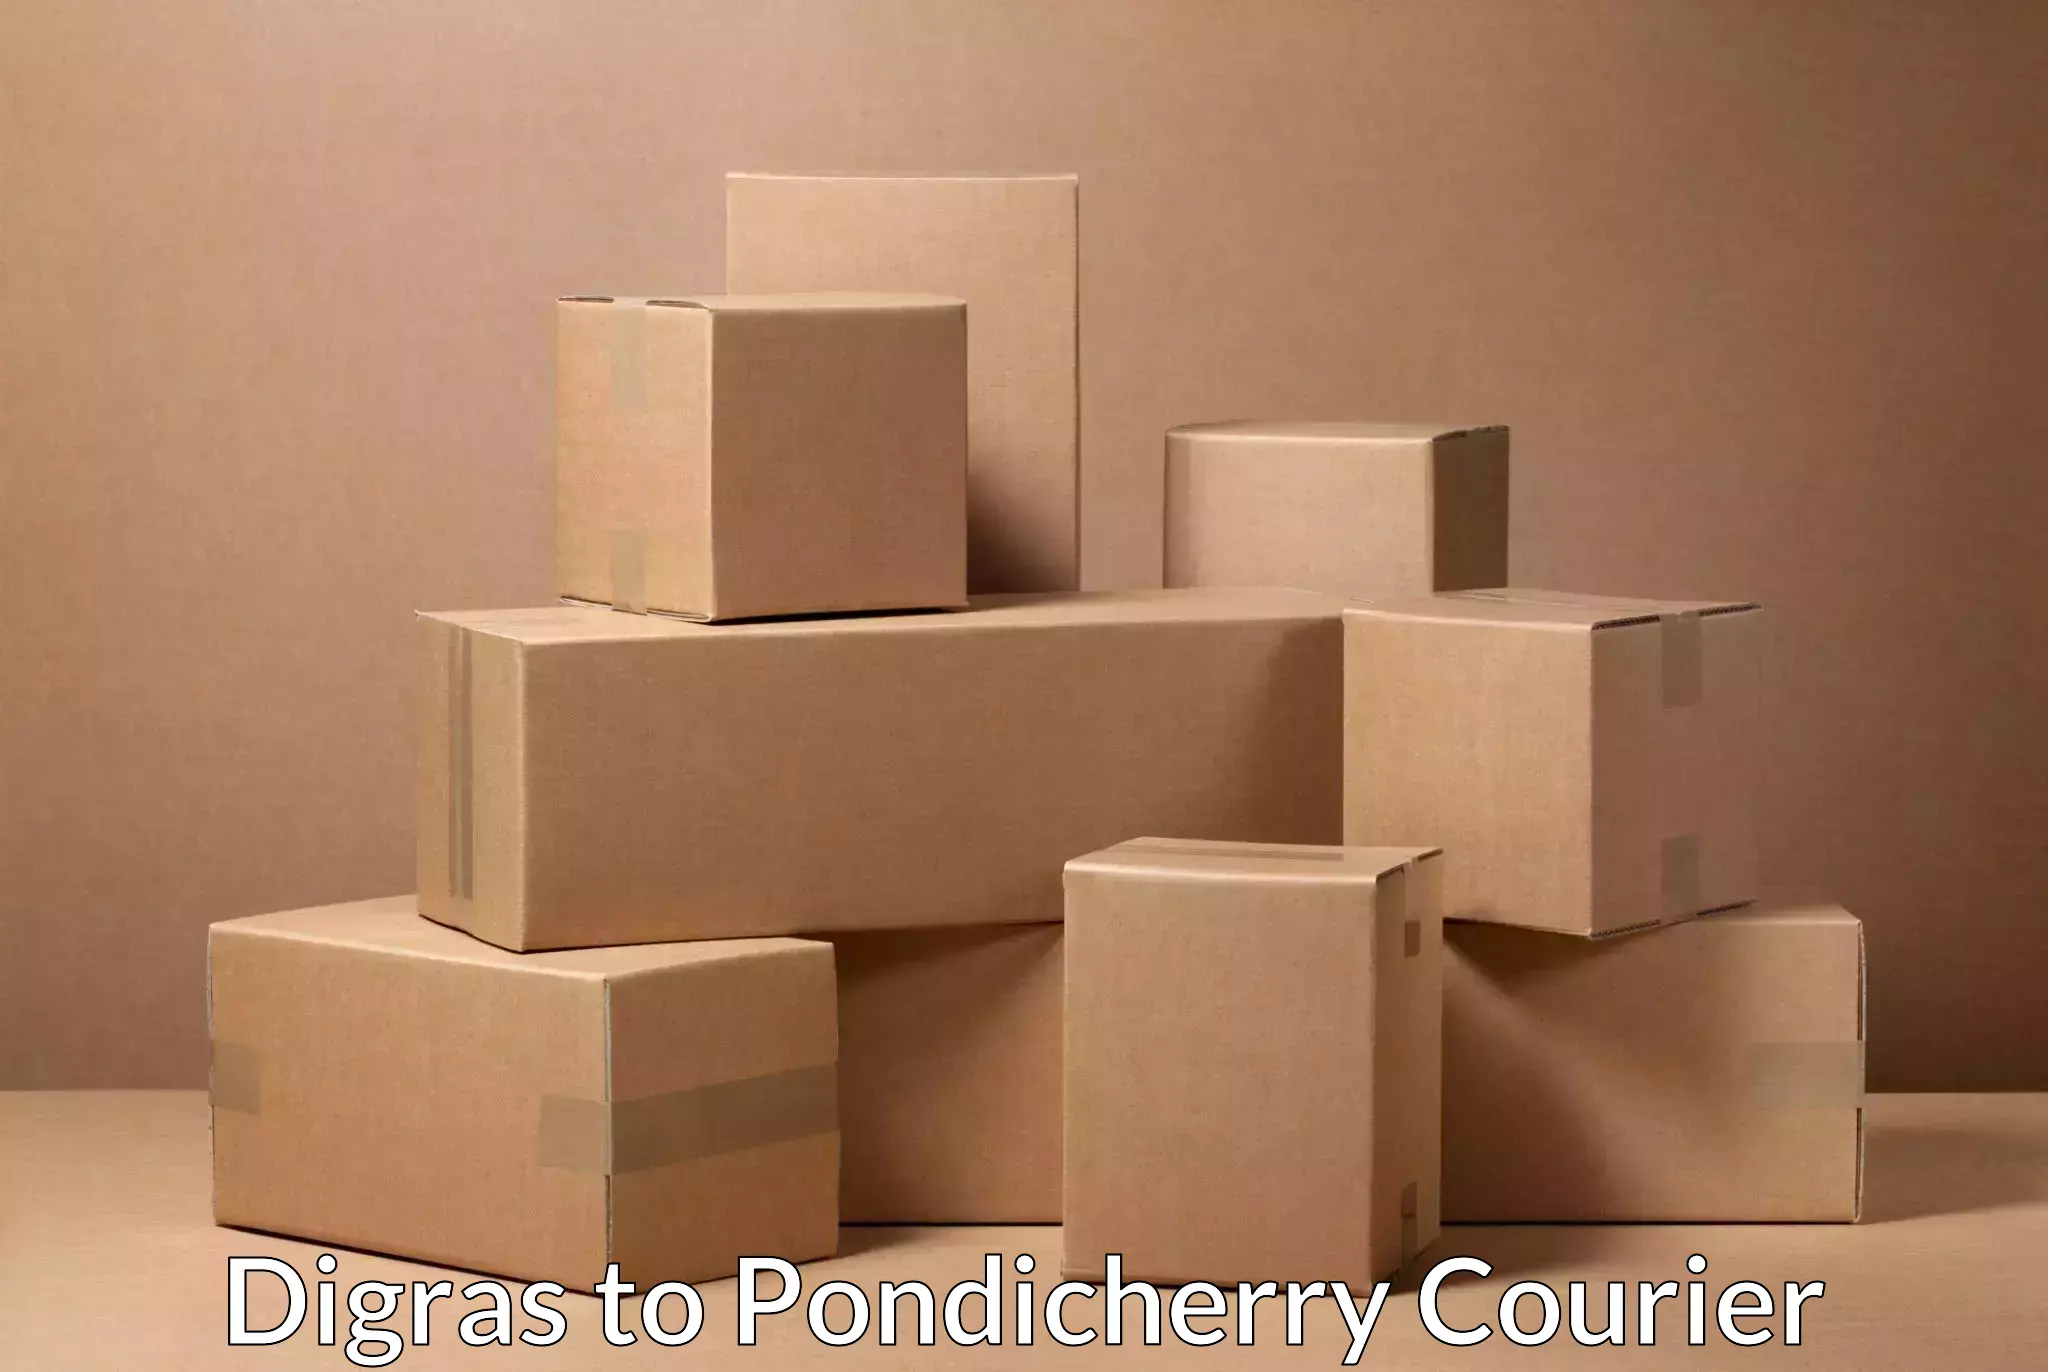 Courier rate comparison in Digras to Pondicherry